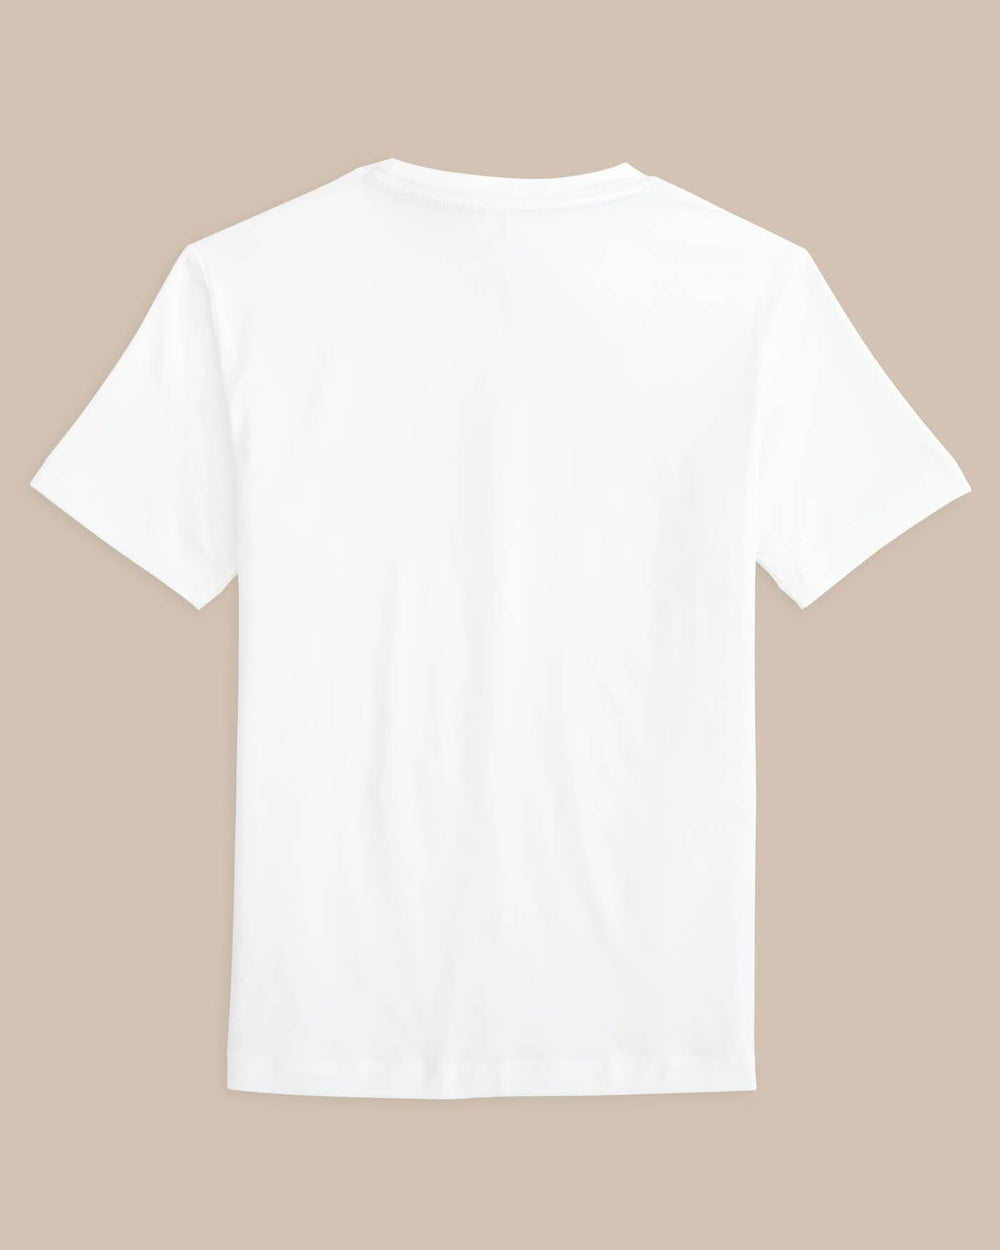 The back view of the Southern Tide Kids ST Overlay Performance Short Sleeve T-Shirt by Southern Tide - Classic White